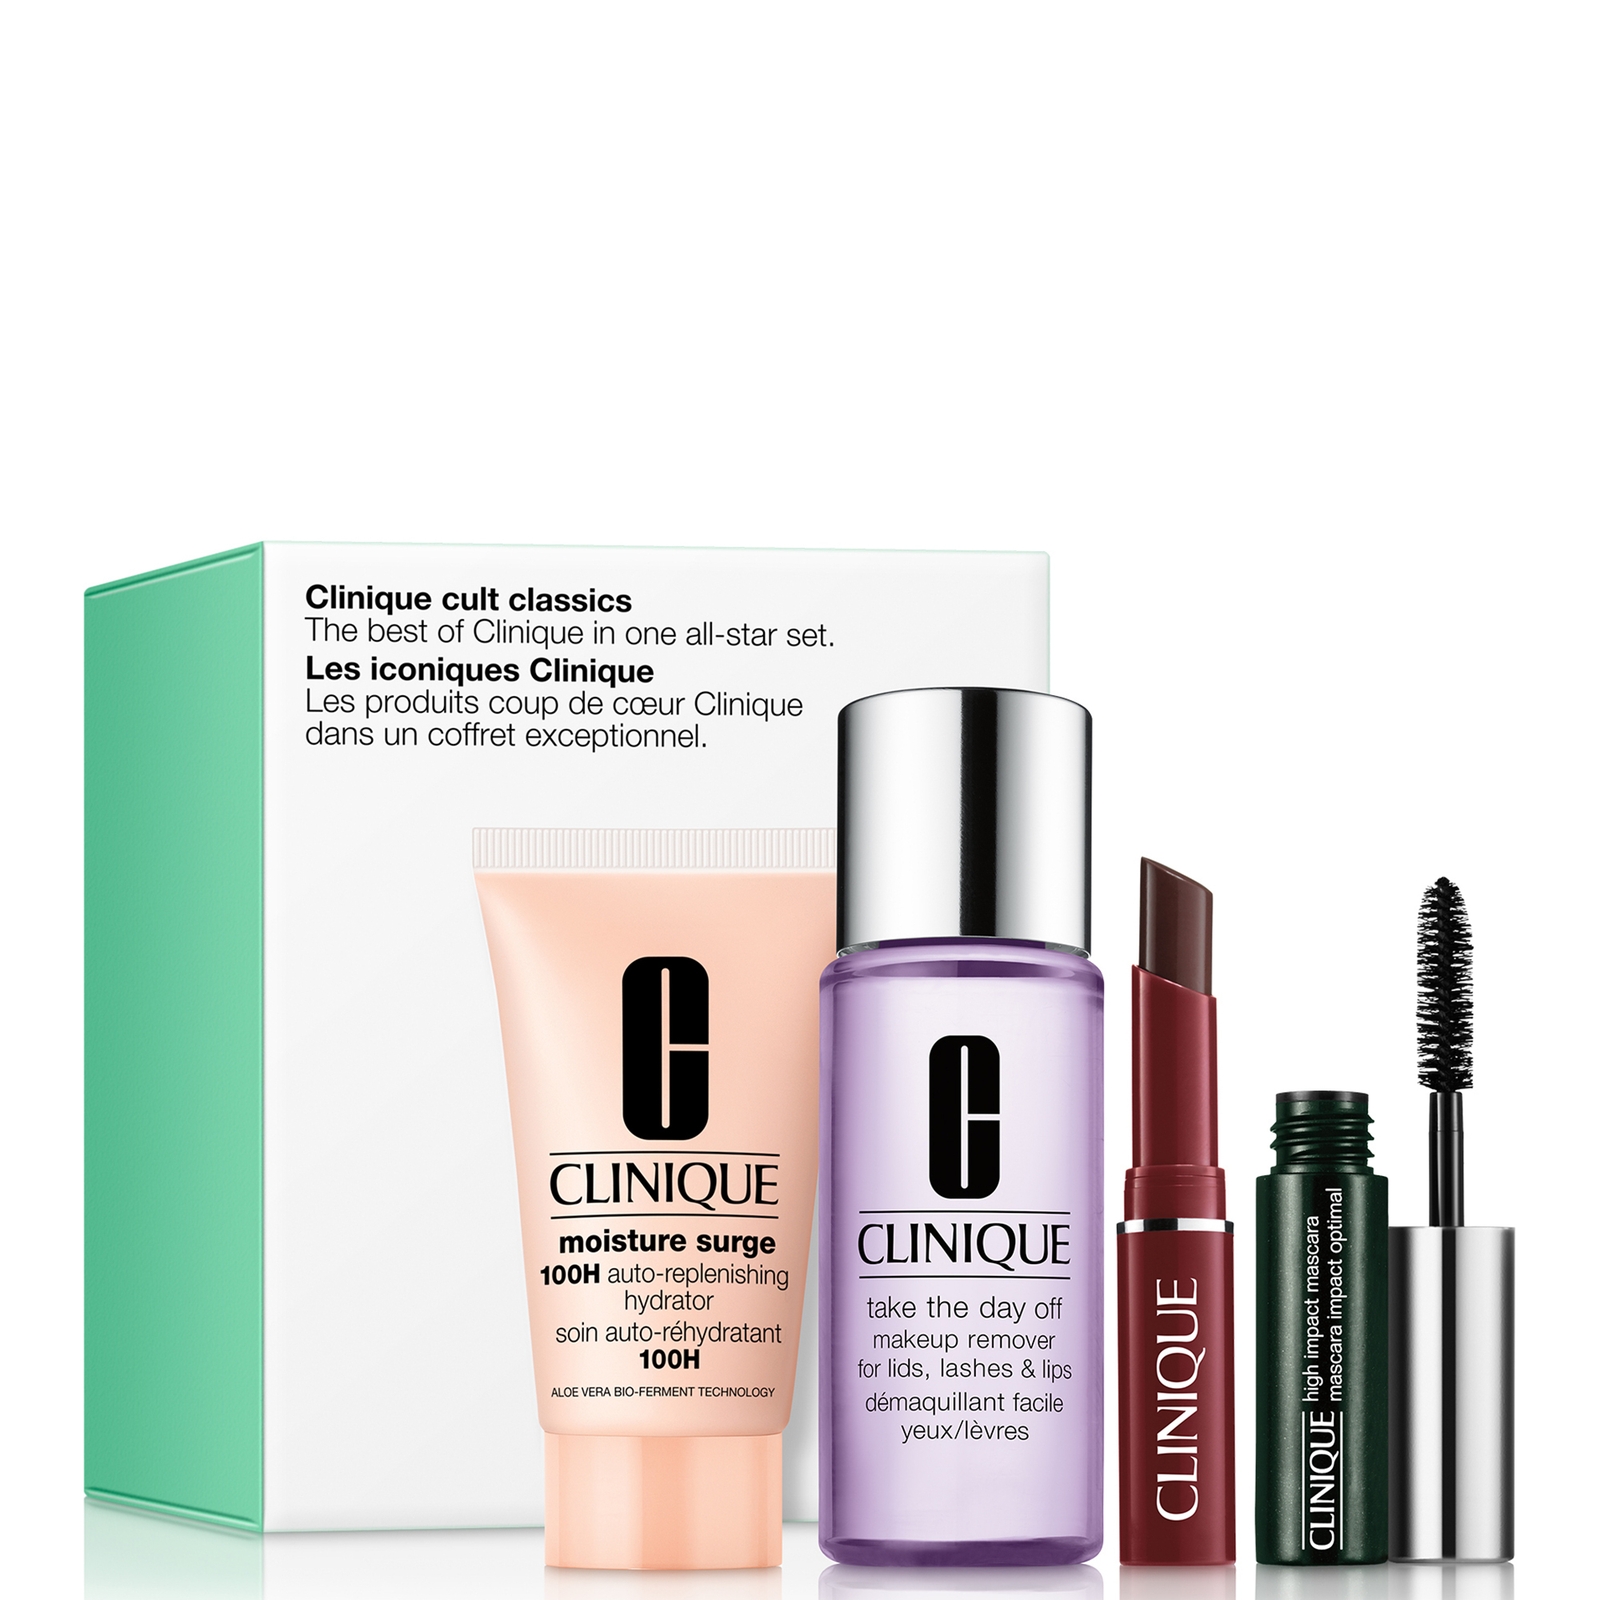 Clinique Cult Classics Skincare And Makeup Gift Set In White